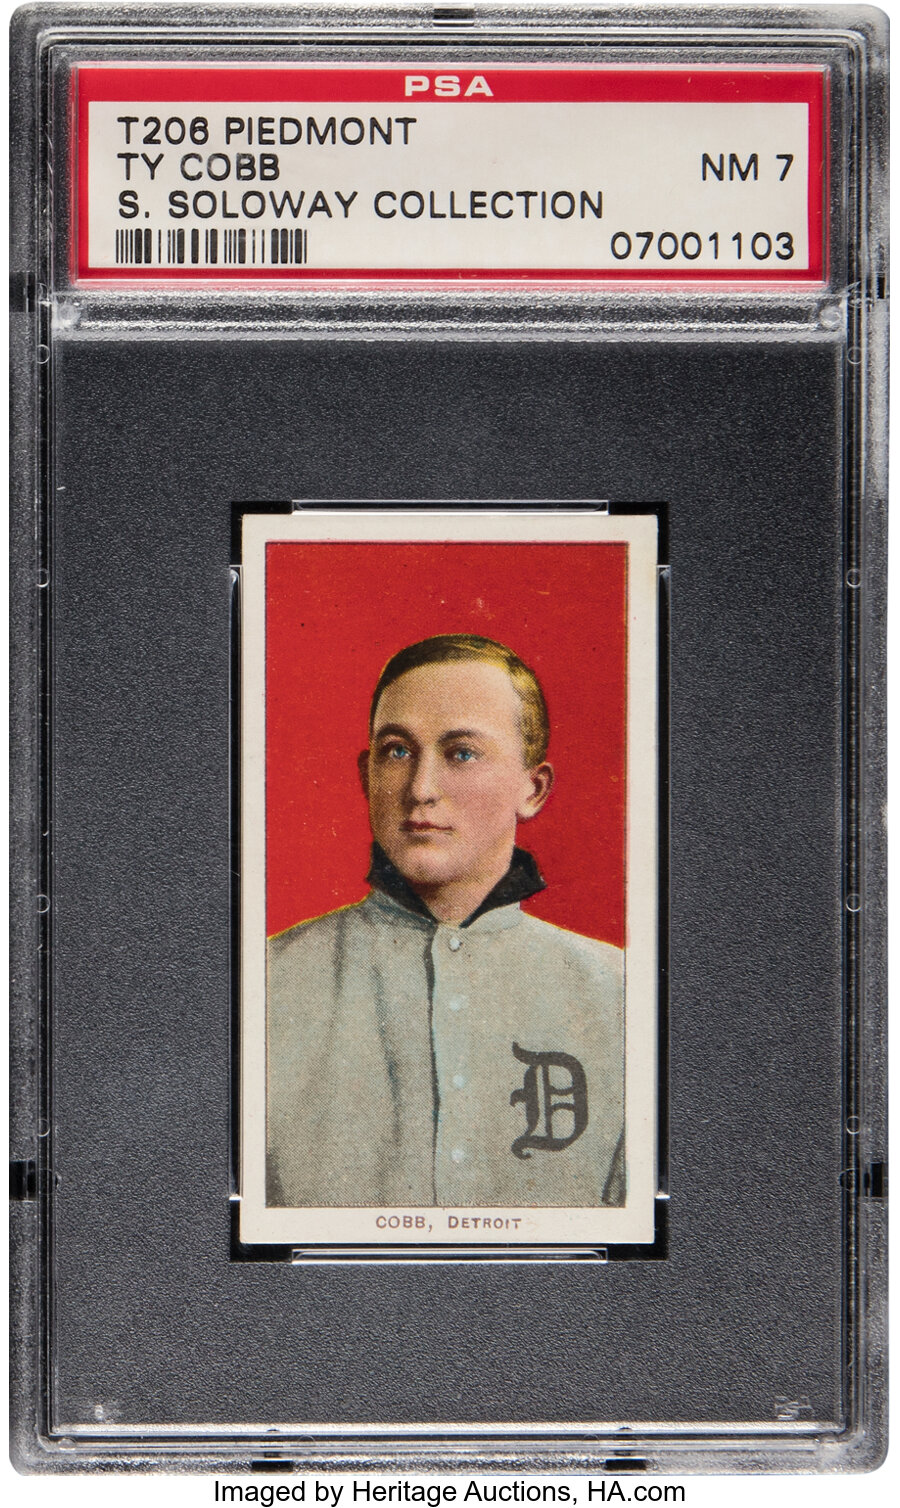 1909-11 T206 Piedmont Ty Cobb (Red Portrait) PSA NM 7 from the Dr. Stephen Soloway Collection